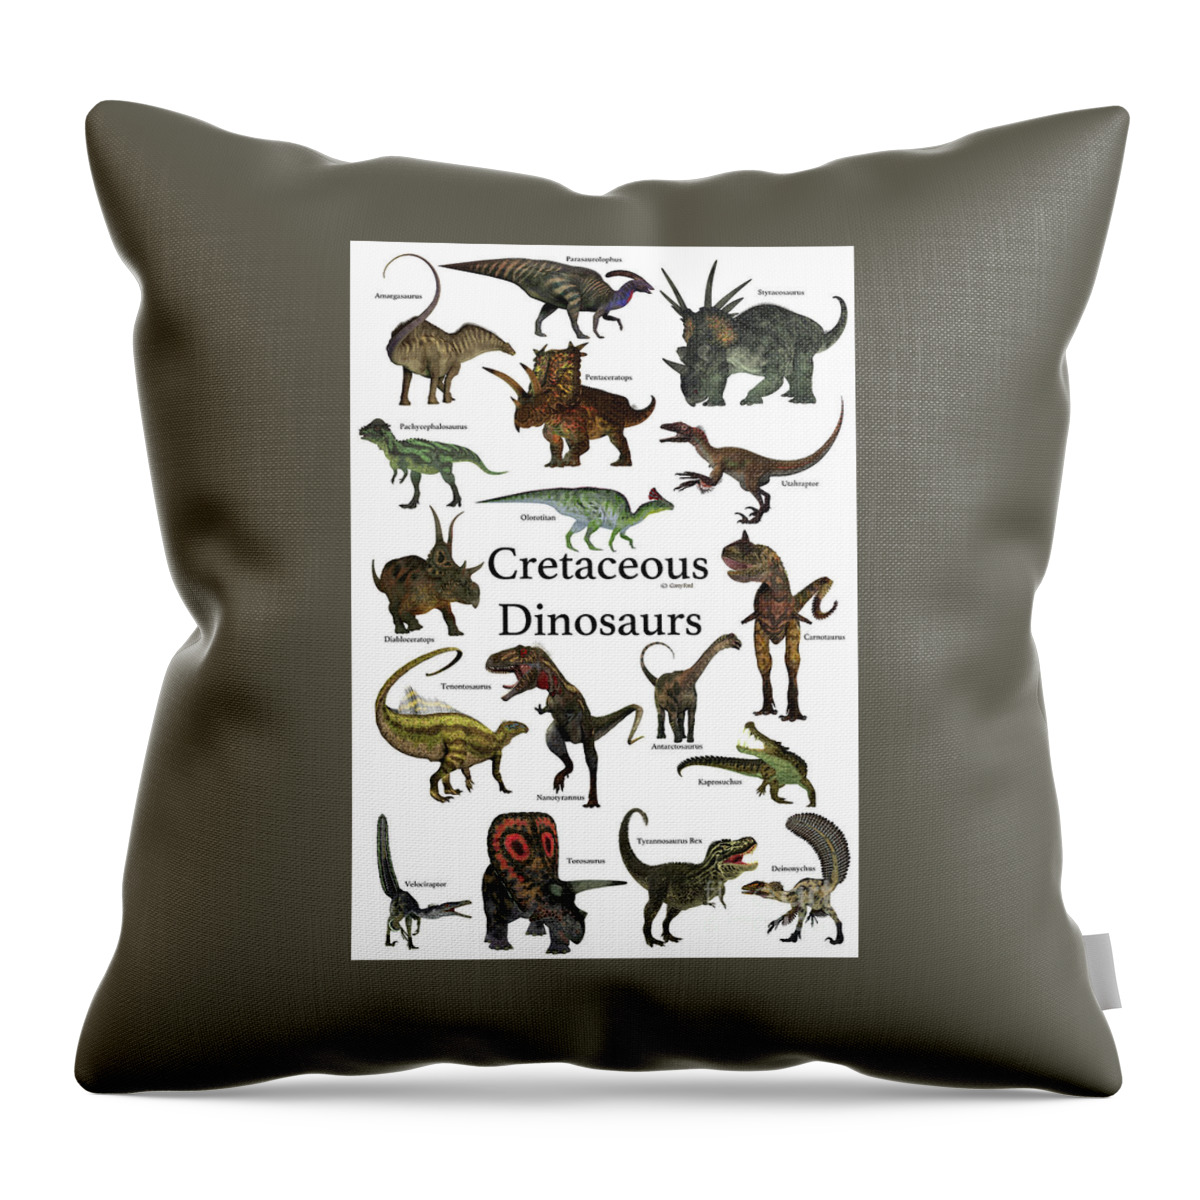 Cretaceous Throw Pillow featuring the digital art Cretaceous Dinosaurs by Corey Ford